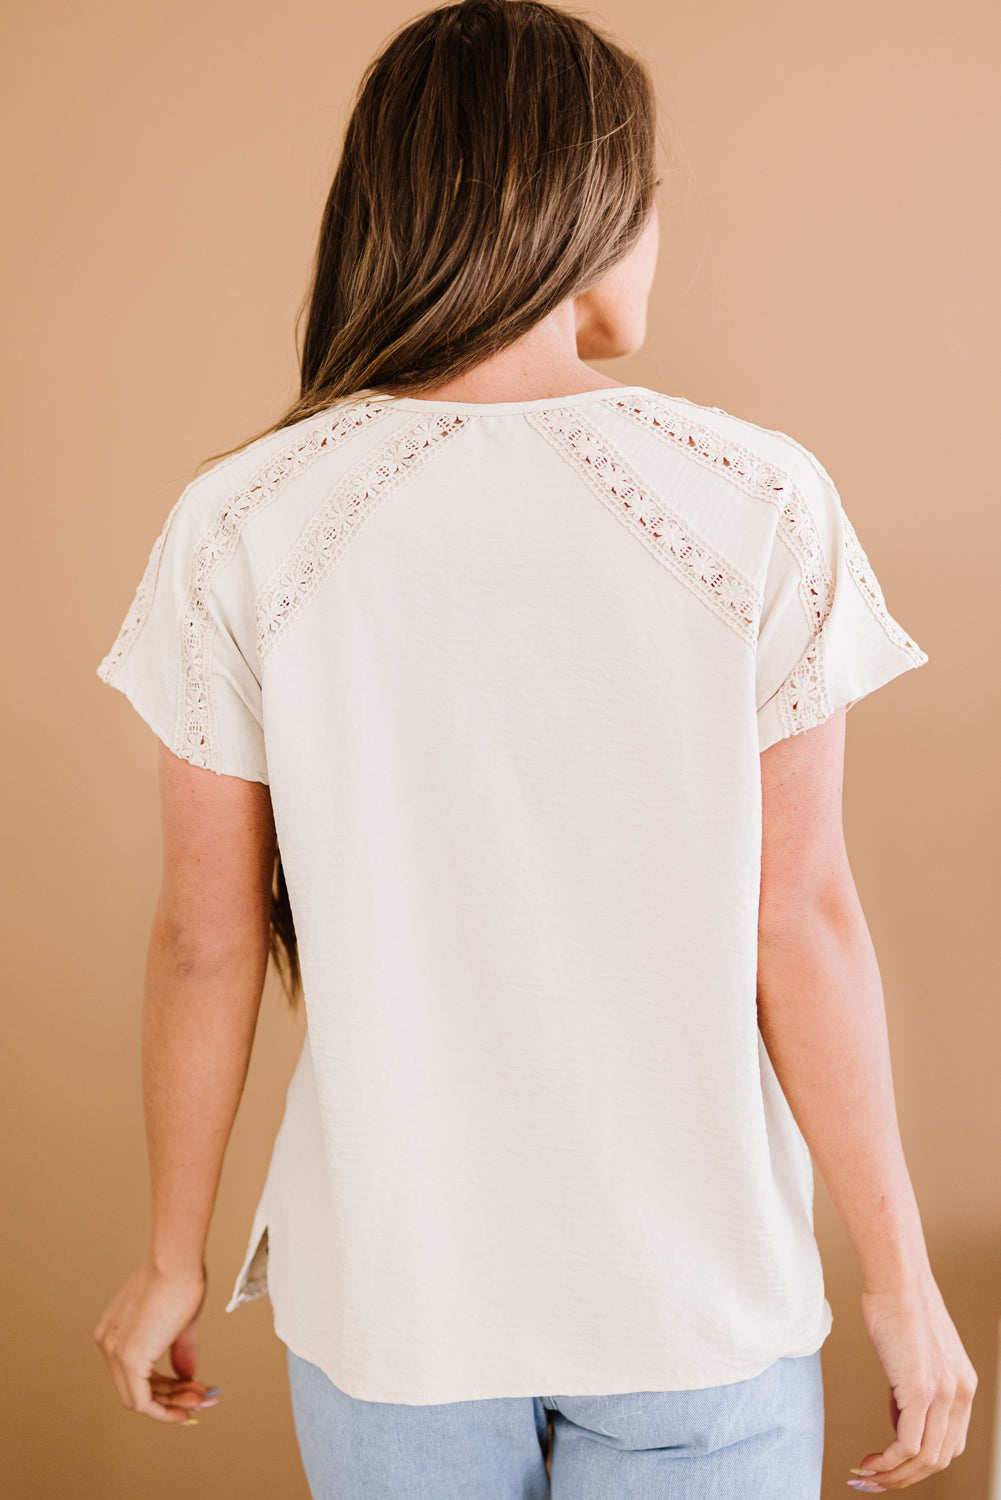 LADIES--Ready for Spring? Beautiful top, Crochet Eyelet Buttoned Short Sleeves